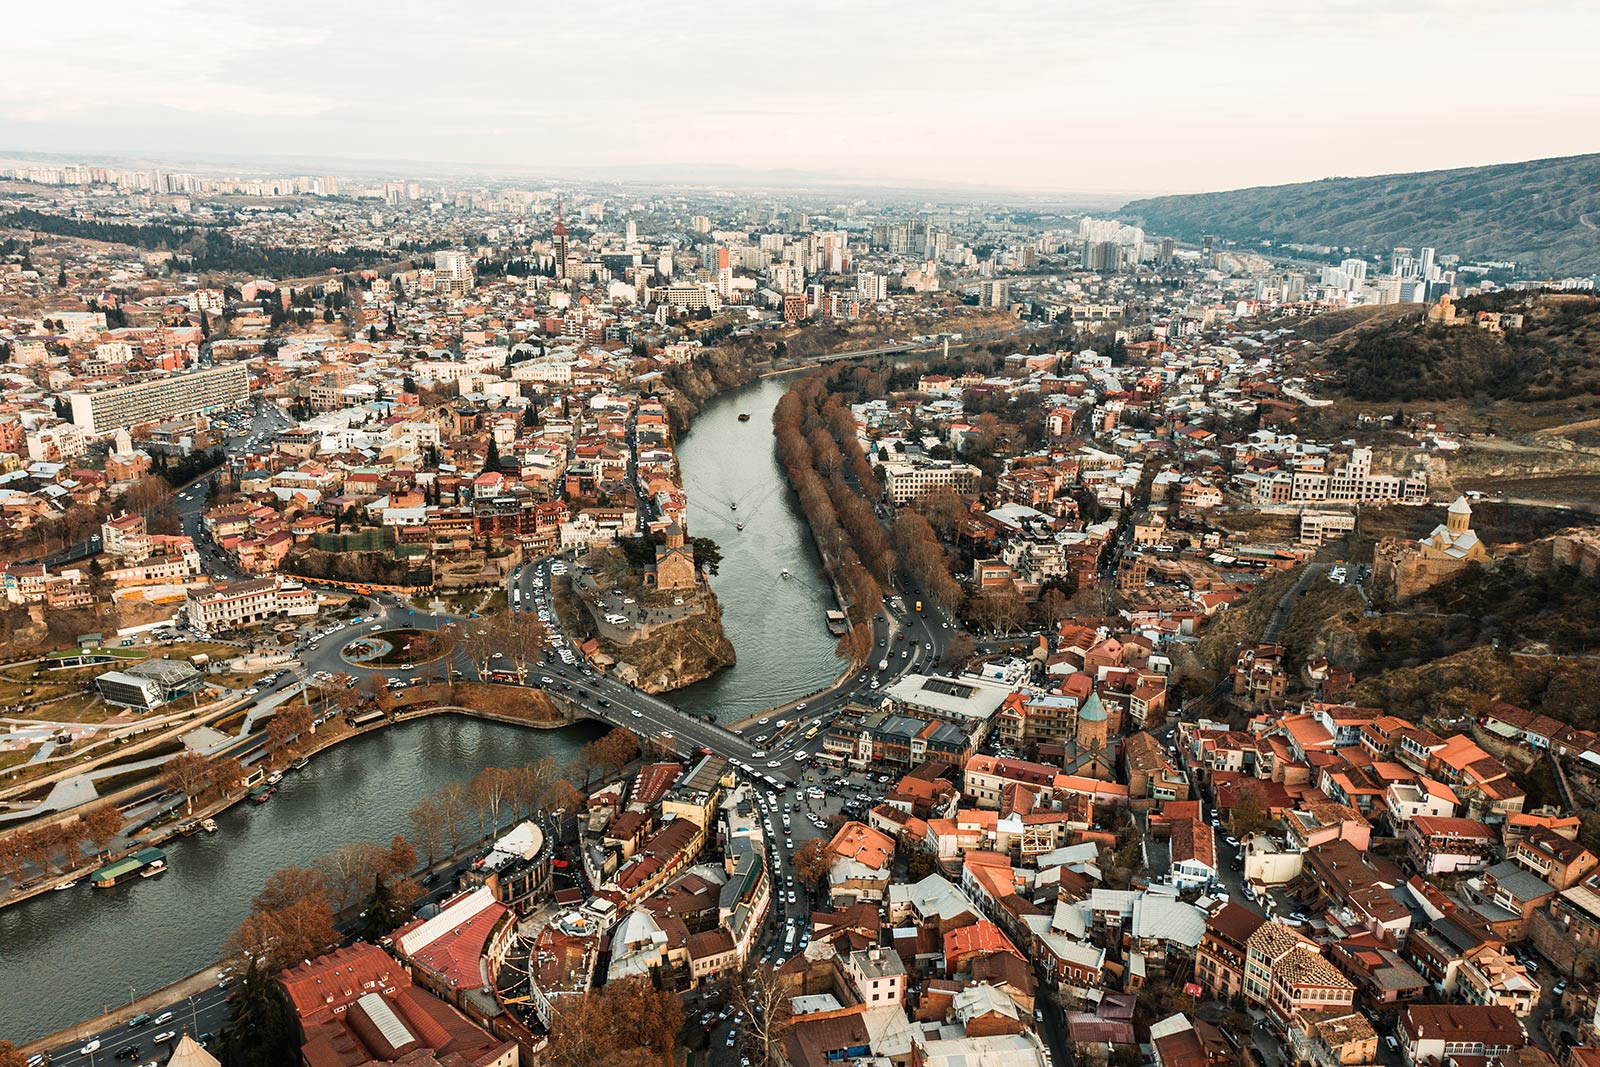 Birds eye view of Tbilisi, Georgia. The disputed series, reflection post